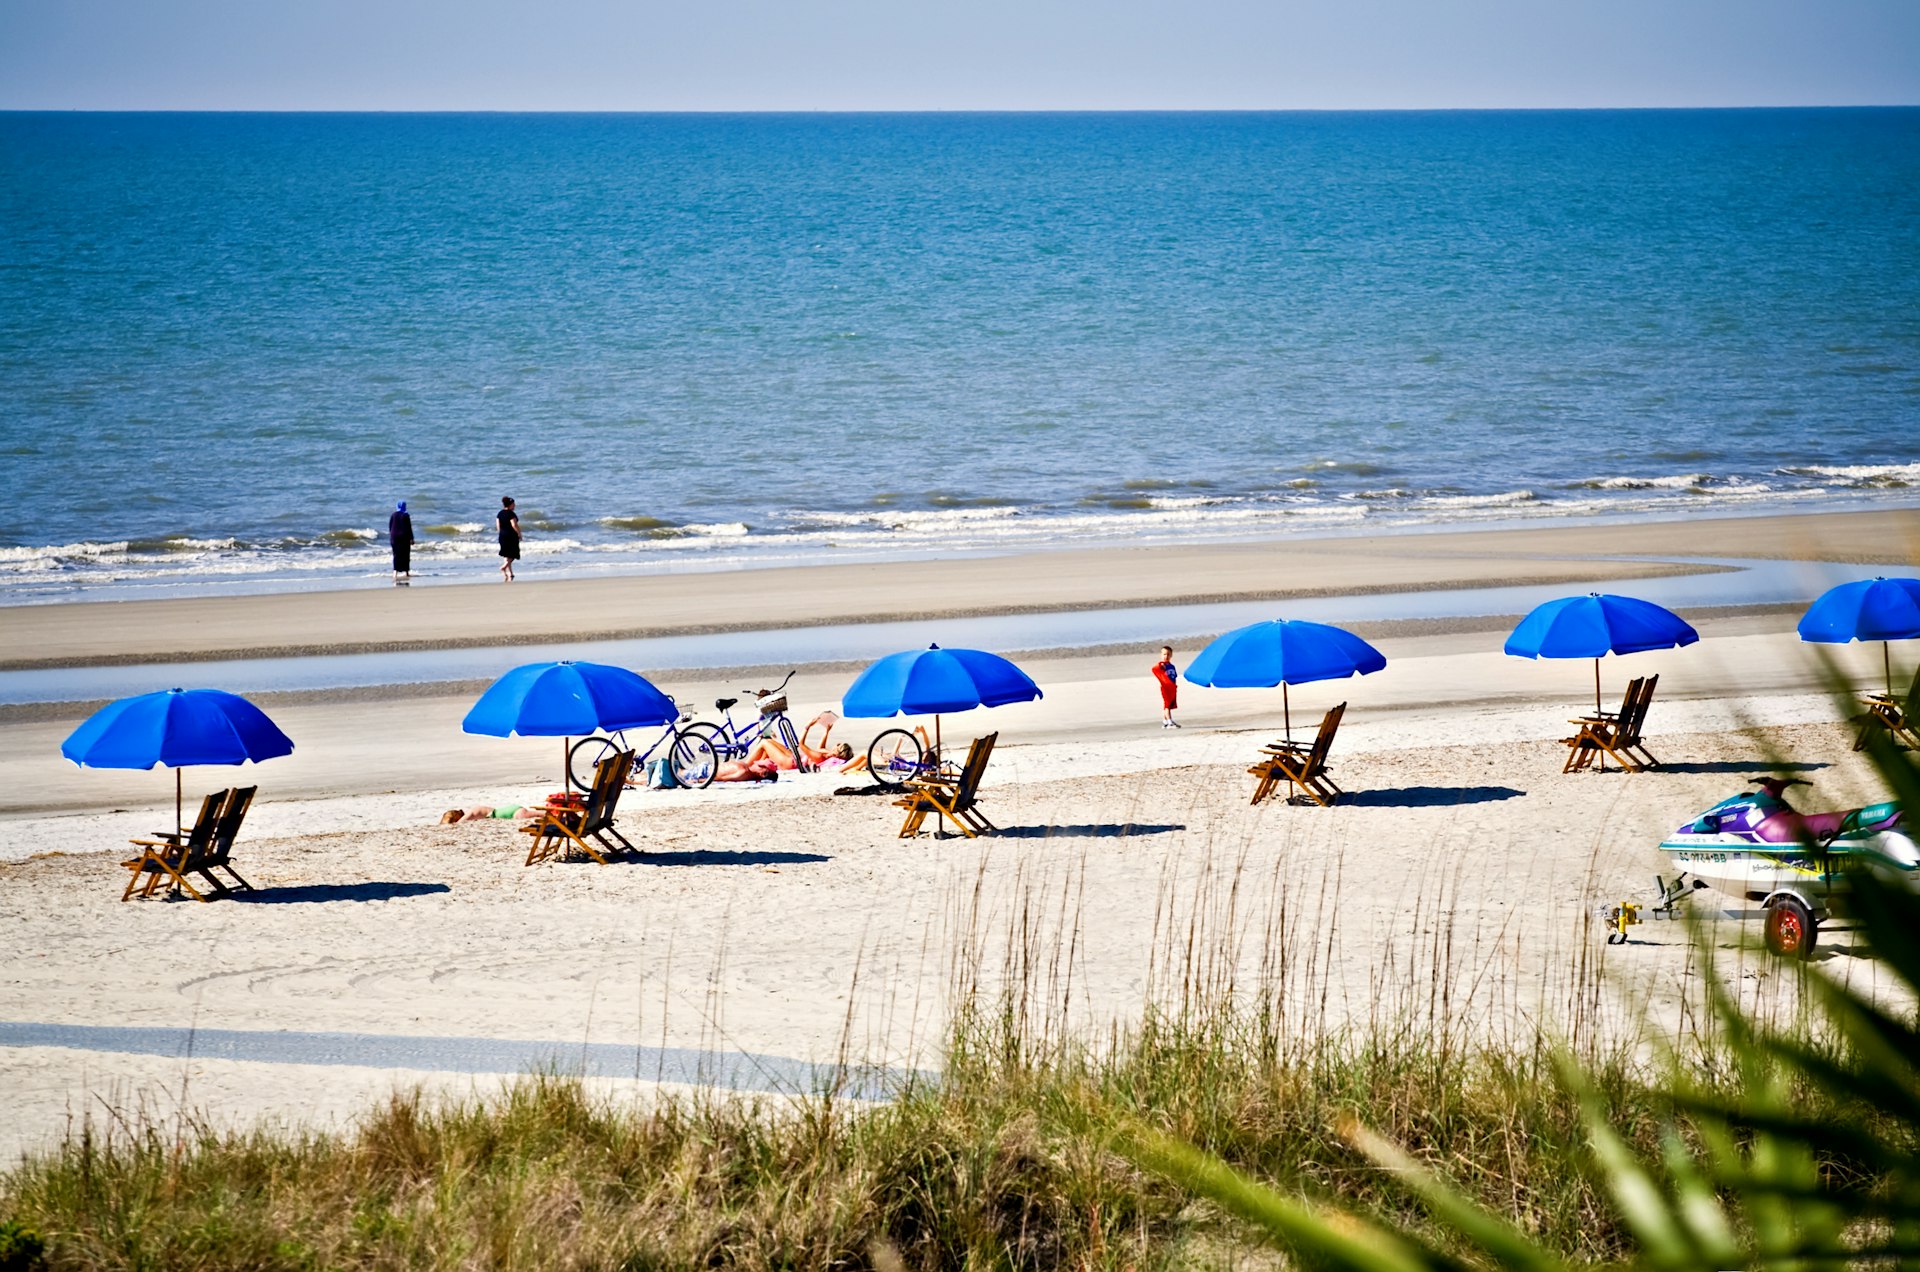 A stretch of white-sand beach with blue sun shades and people enjoying the sunshine